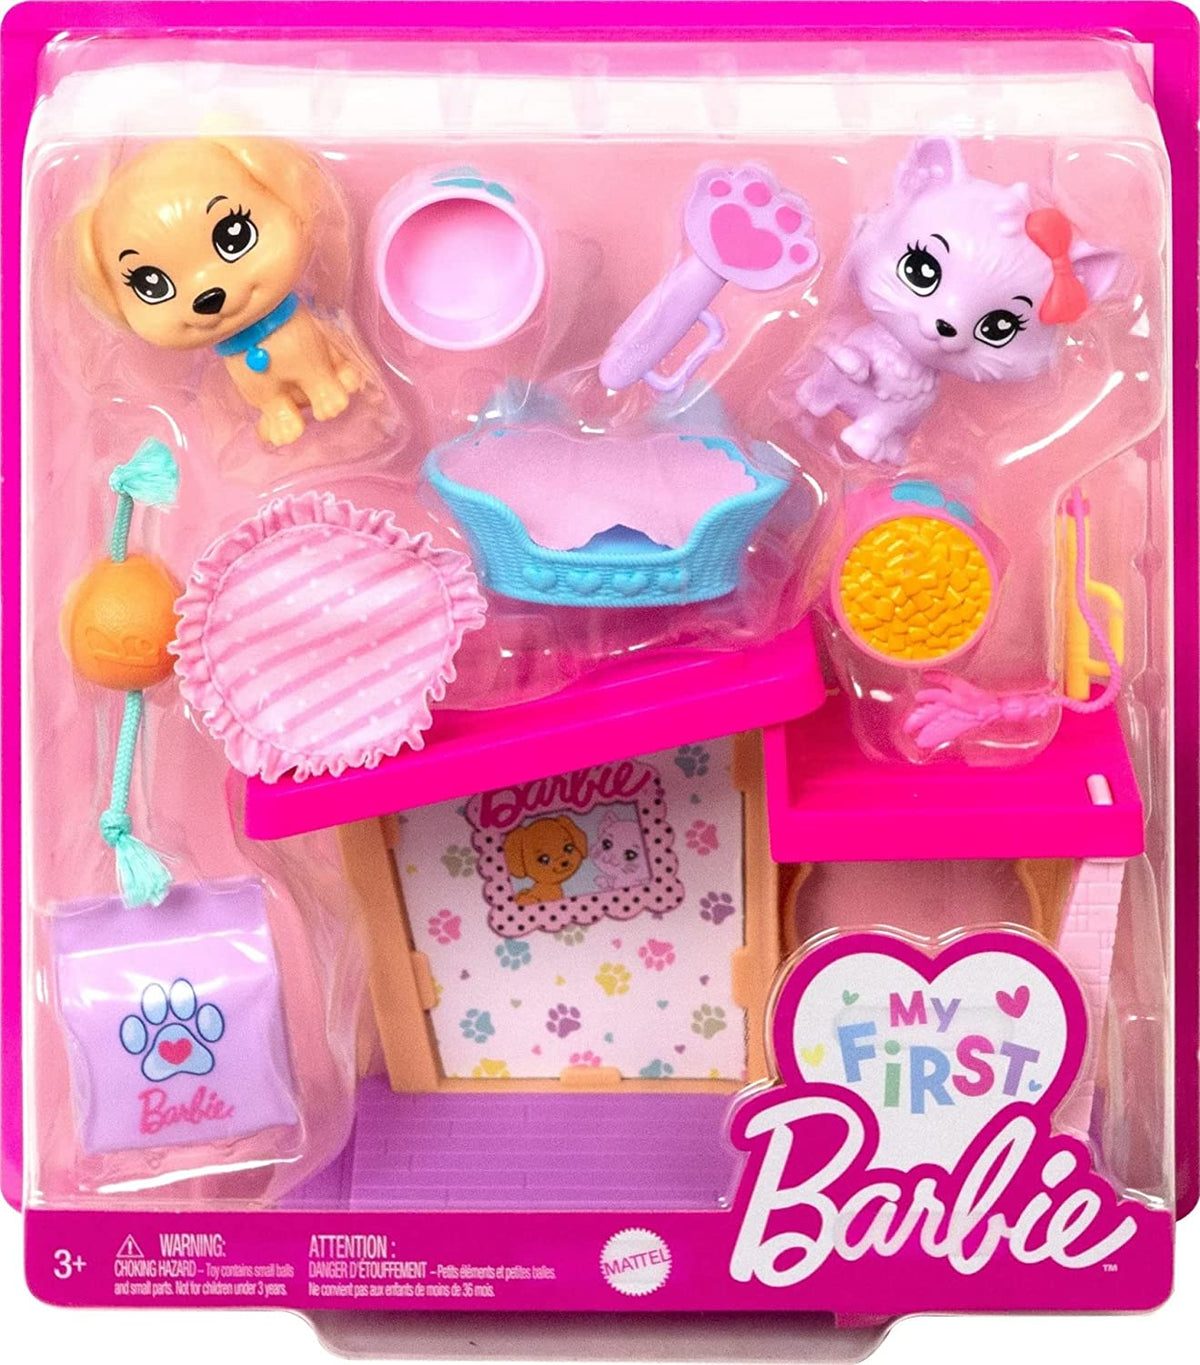 My First Barbie Pet and Accessories - Cat/Dog